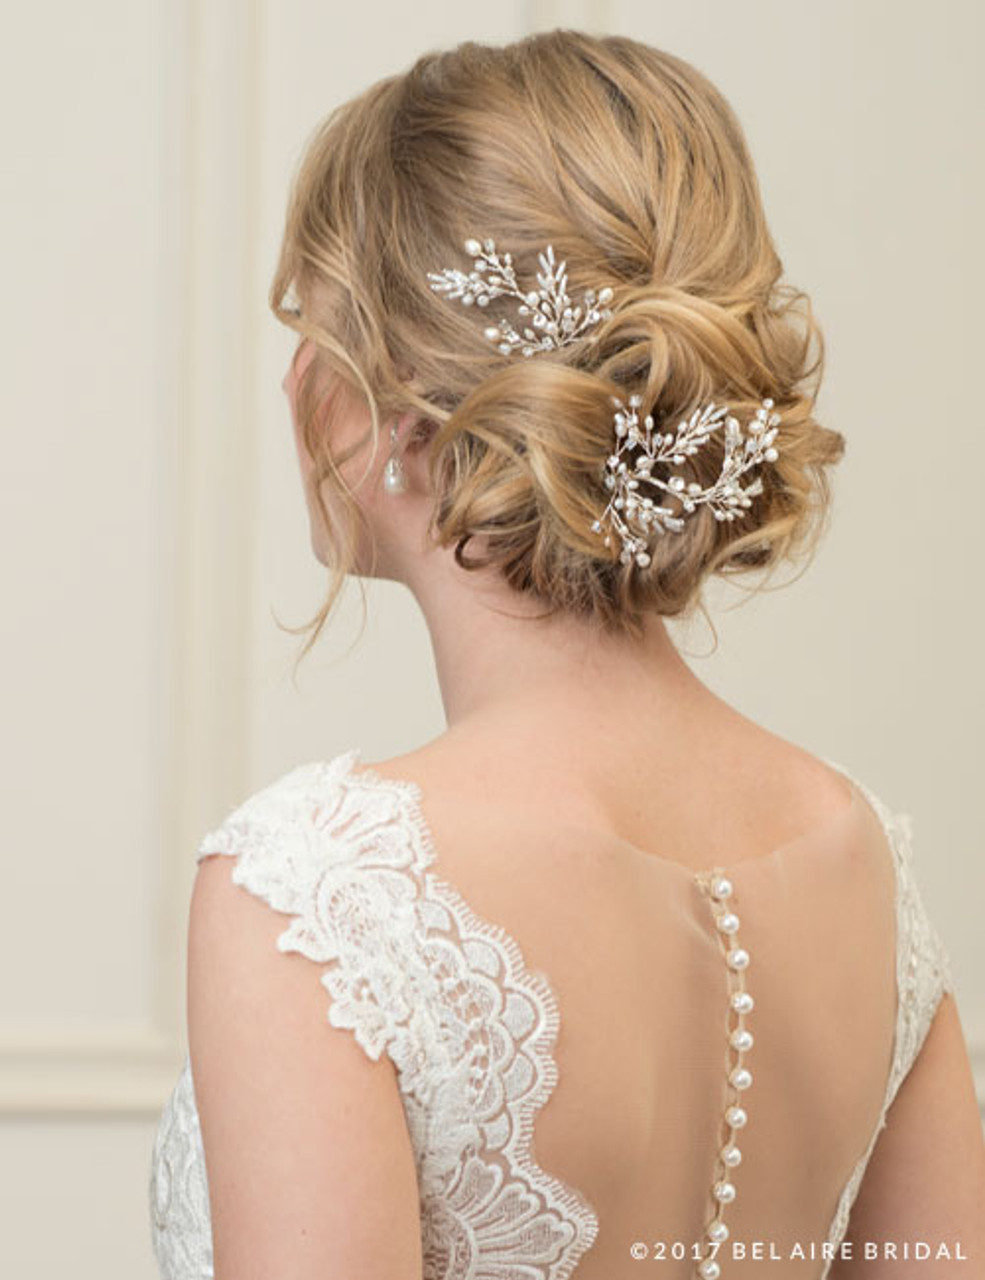 Bel Aire Bridal Hair Pins 1727 - Hair sticks of freshwater pearls and  rhinestones